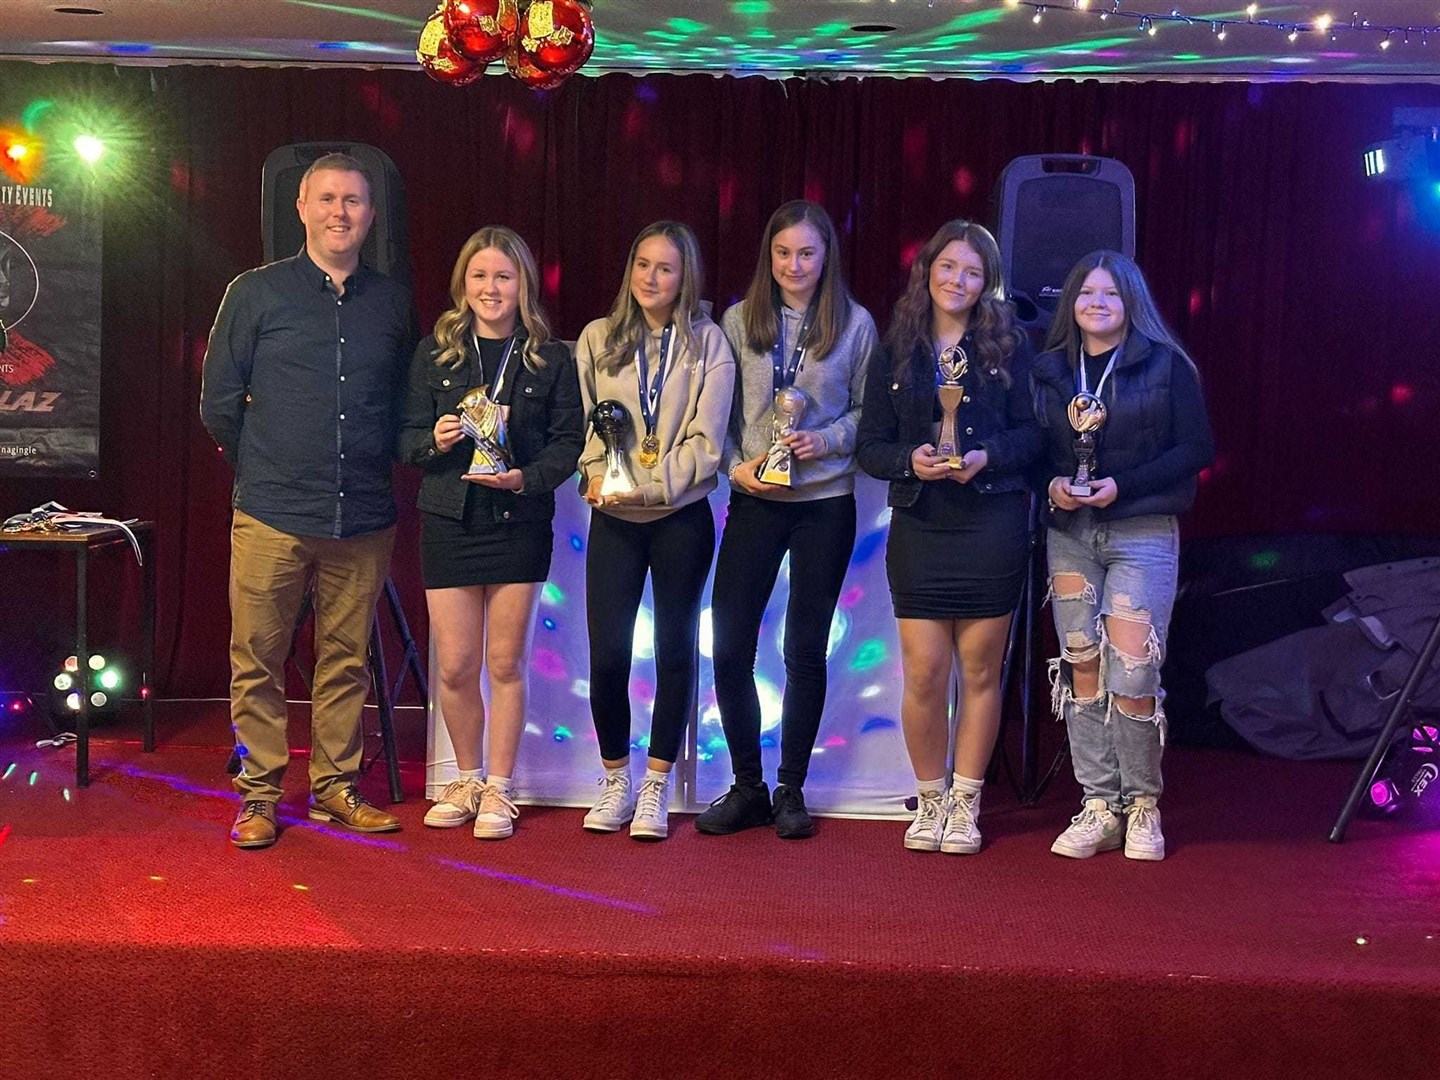 Ross County's under-14 girls award winners for 2023 - Ethos award: Evie Mackinnon. Most improved: Ellie Hutton. Player's player: Sofia Whall. Player of the year: Millie Foster. Top scorer: Yvie Chisholm